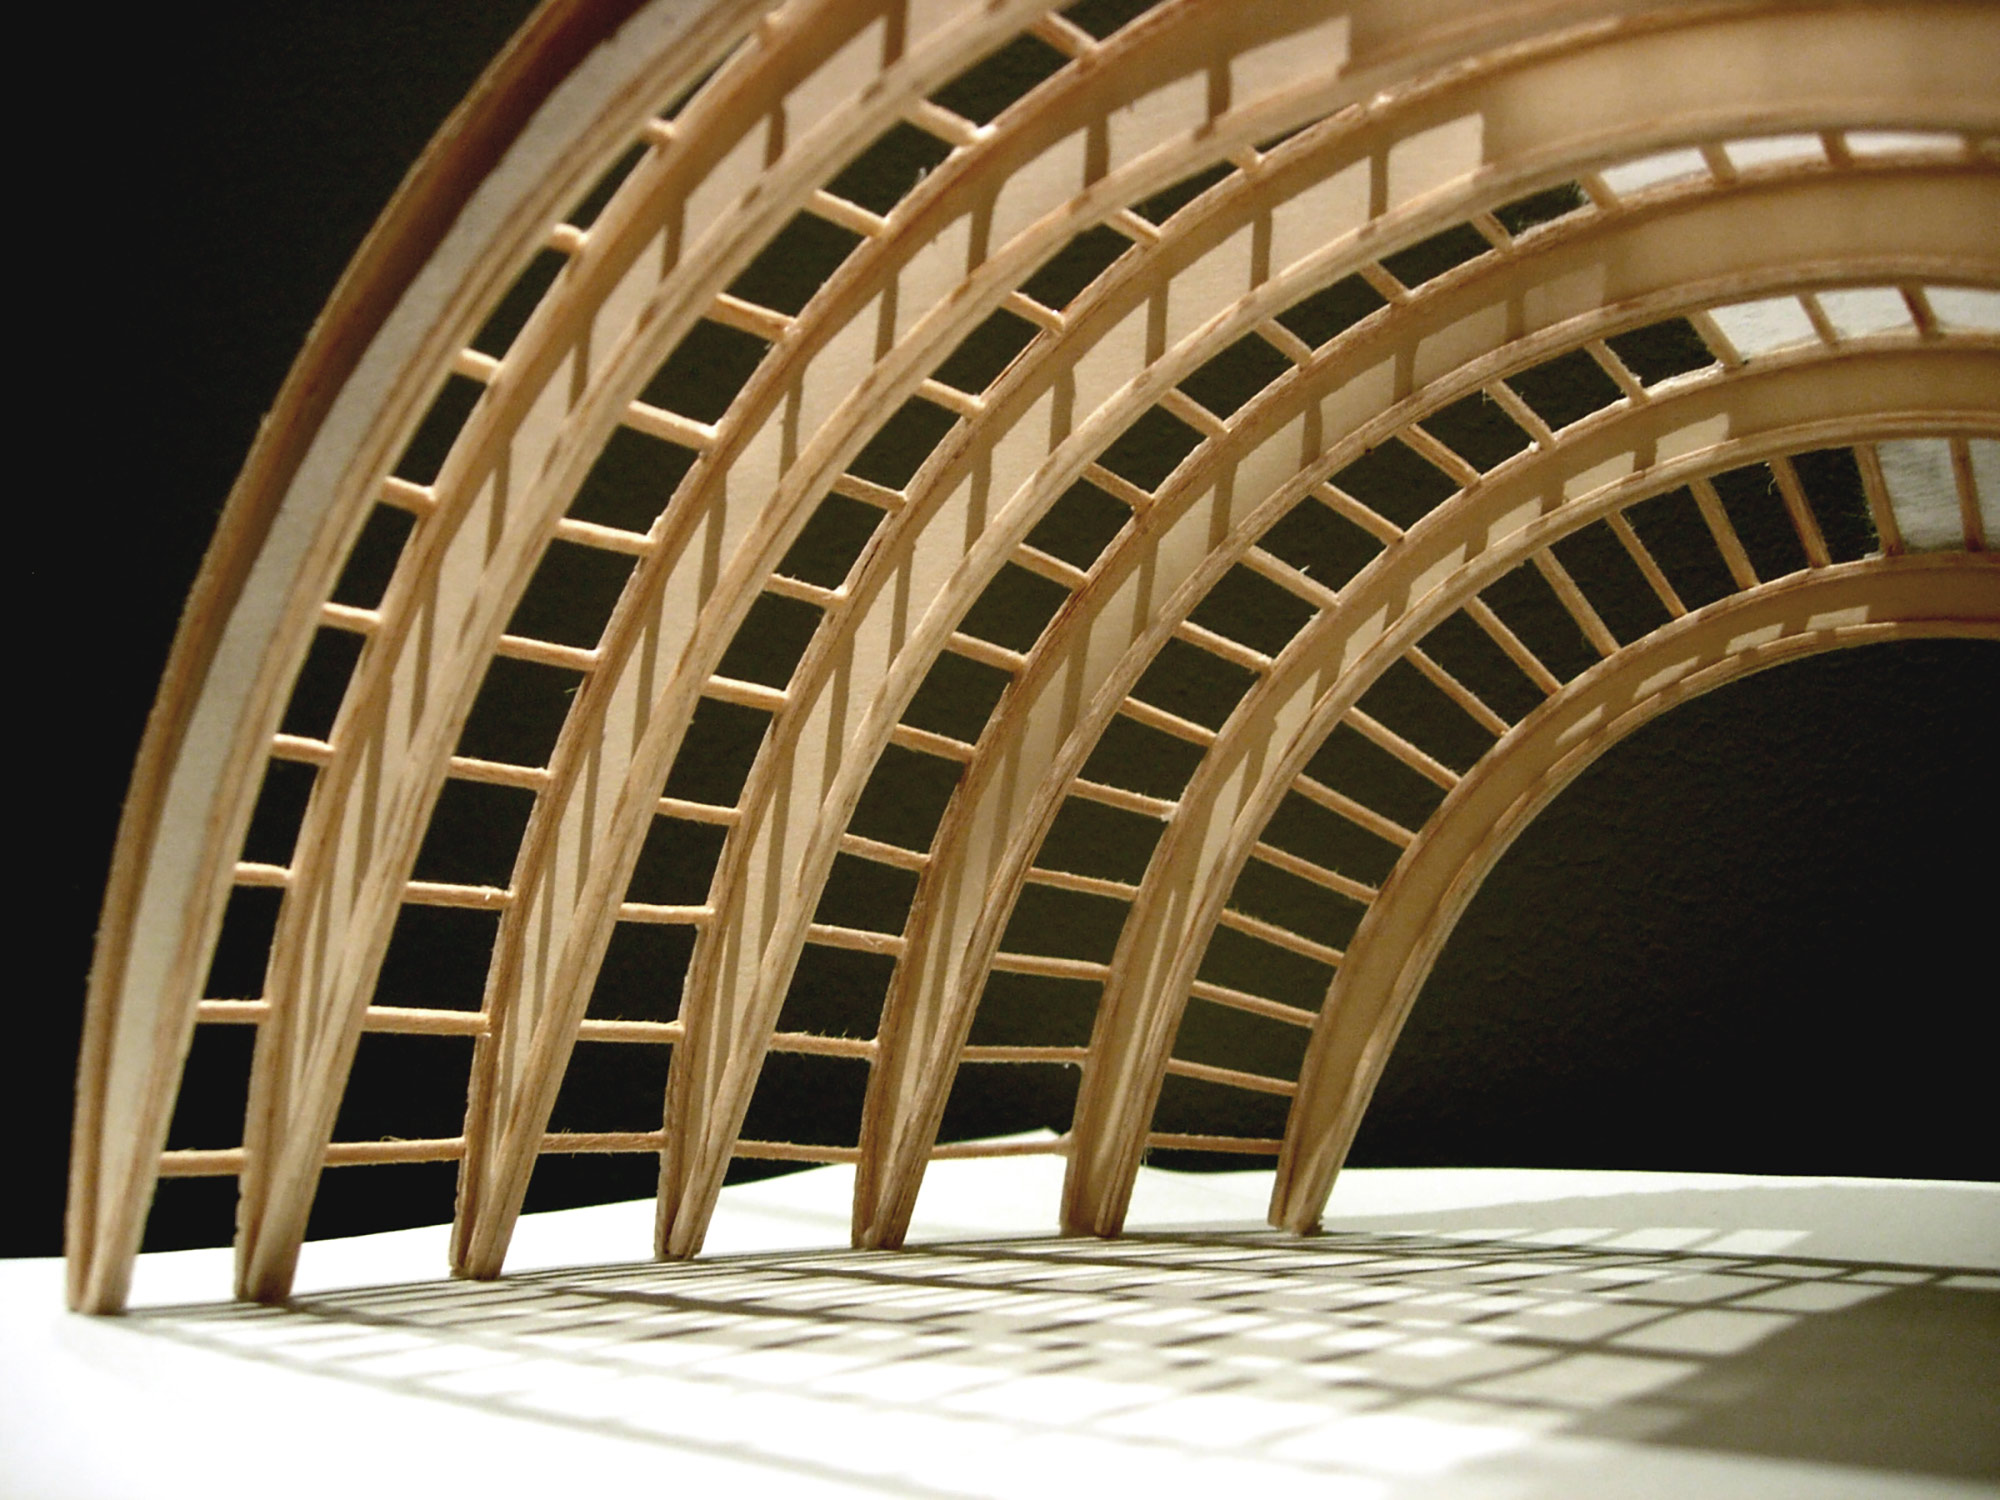 Oakview Bandshell, model, by Kevin Schorn